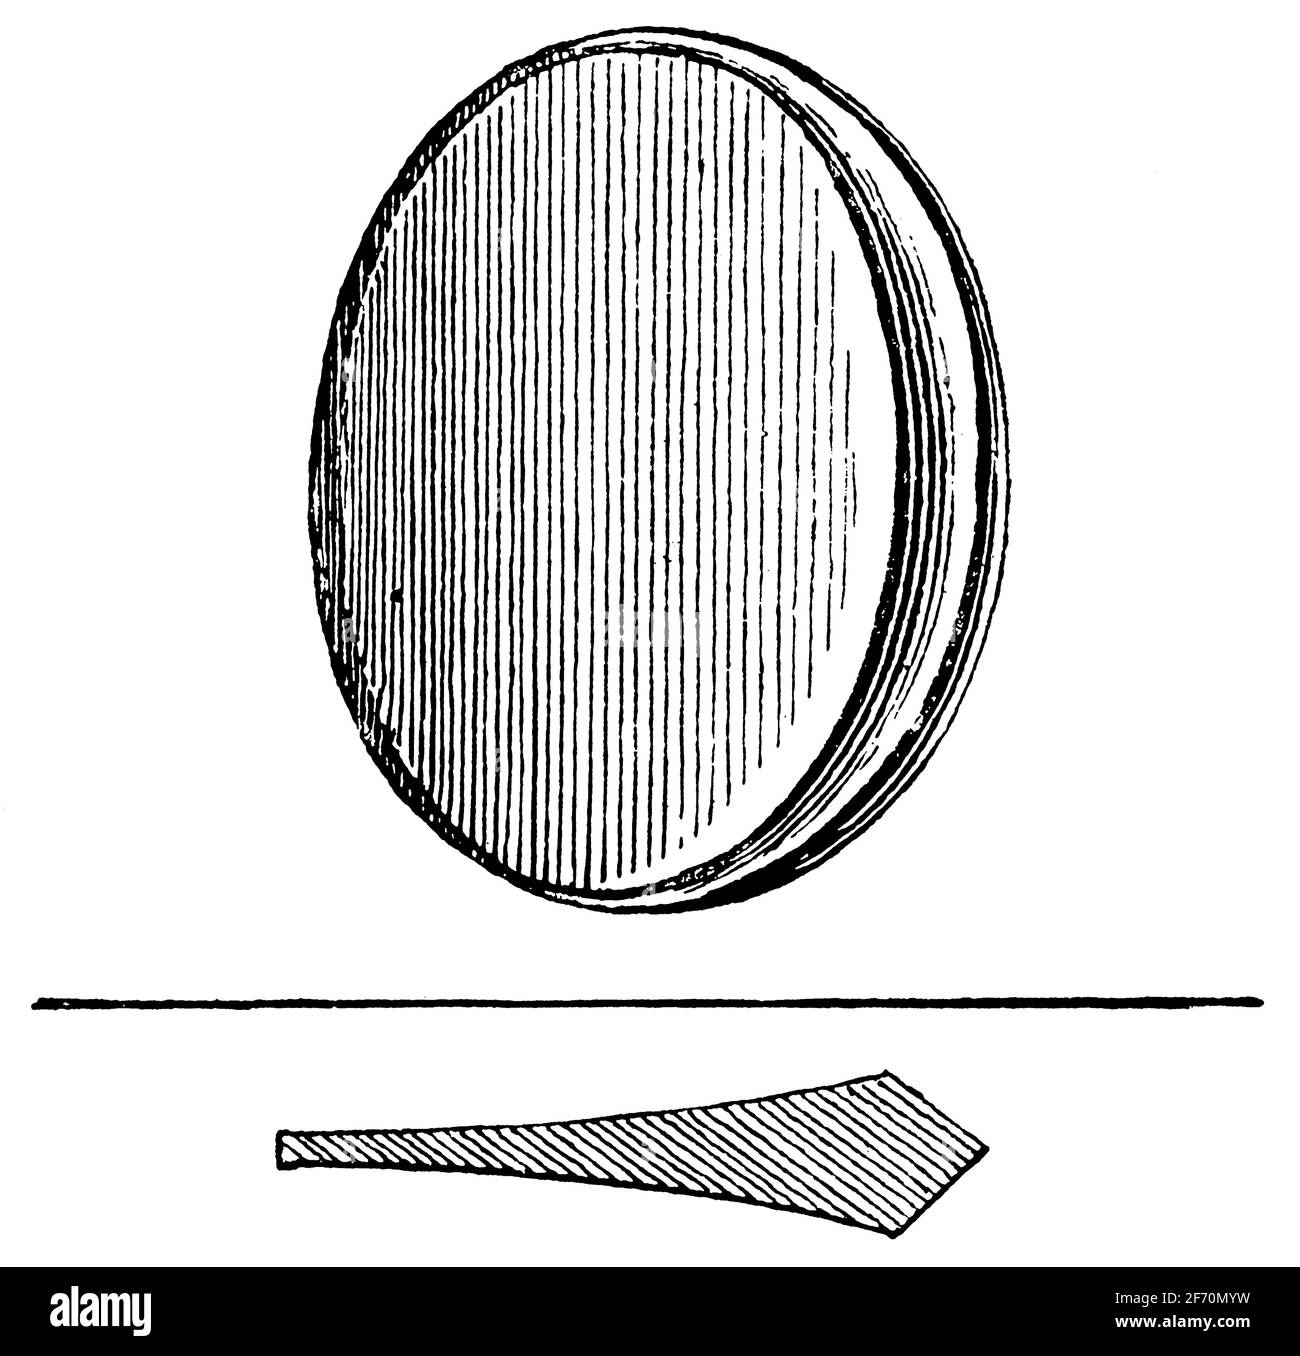 Prismatic ground spectacle lens. Illustration of the 19th century. Germany. White background. Stock Photo